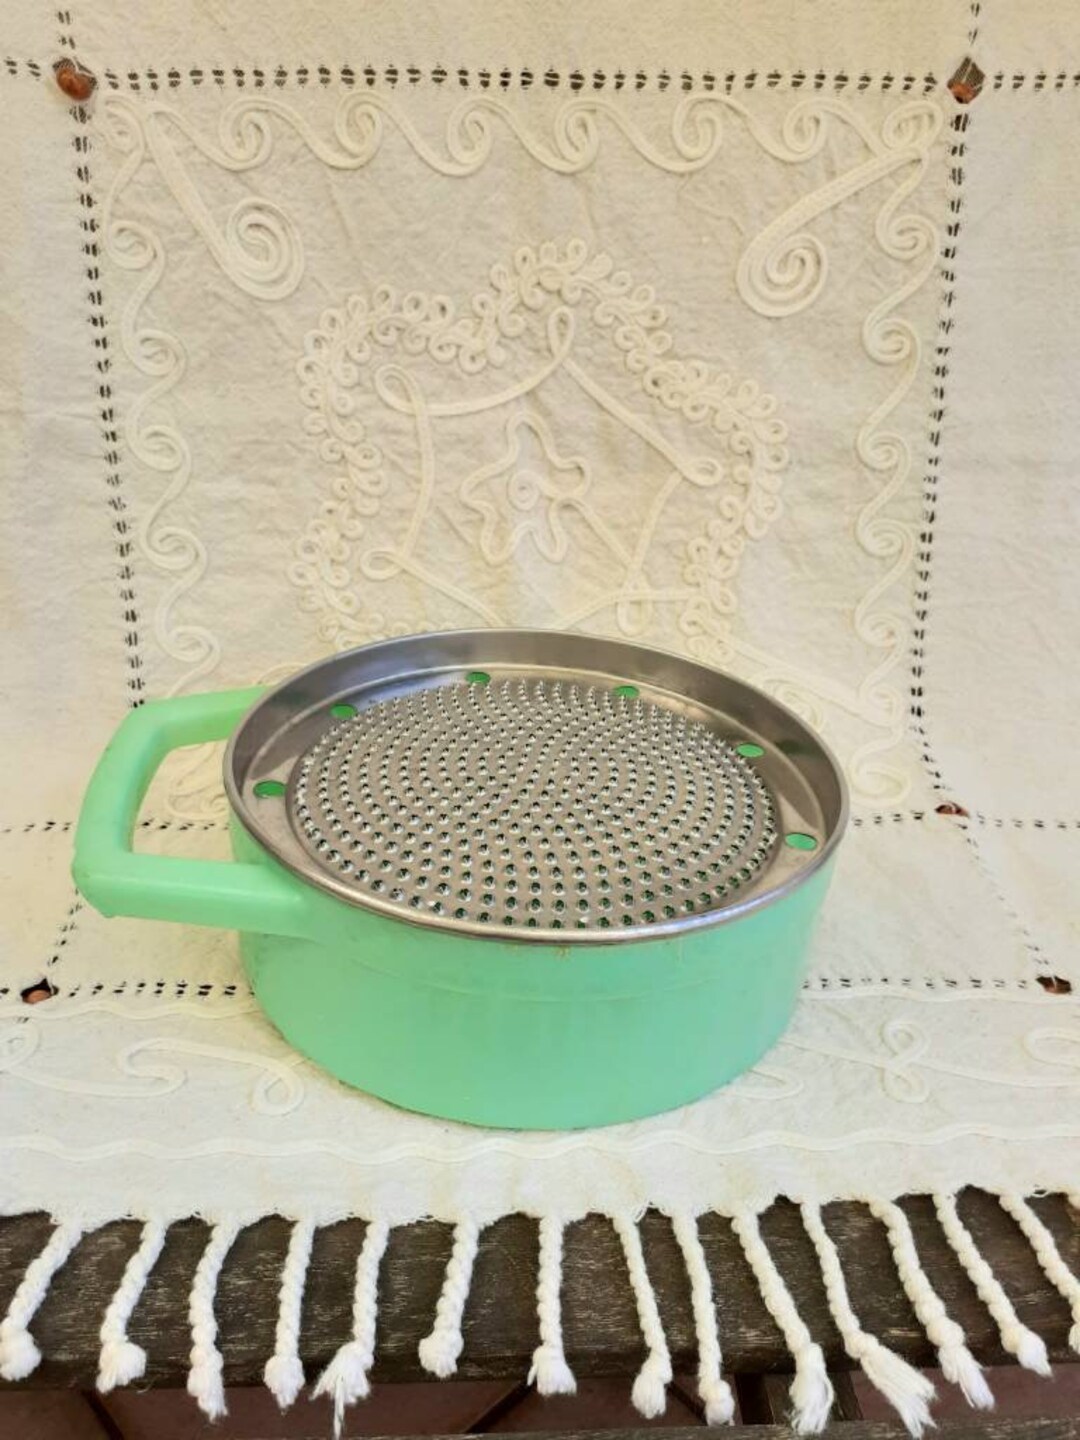 Vintage 1950s Italian Round Steel Cheese Grater Box for Parmesan Cheese.  Cheese Holder Bowl With Grater Lid, Quality of the Past Times 